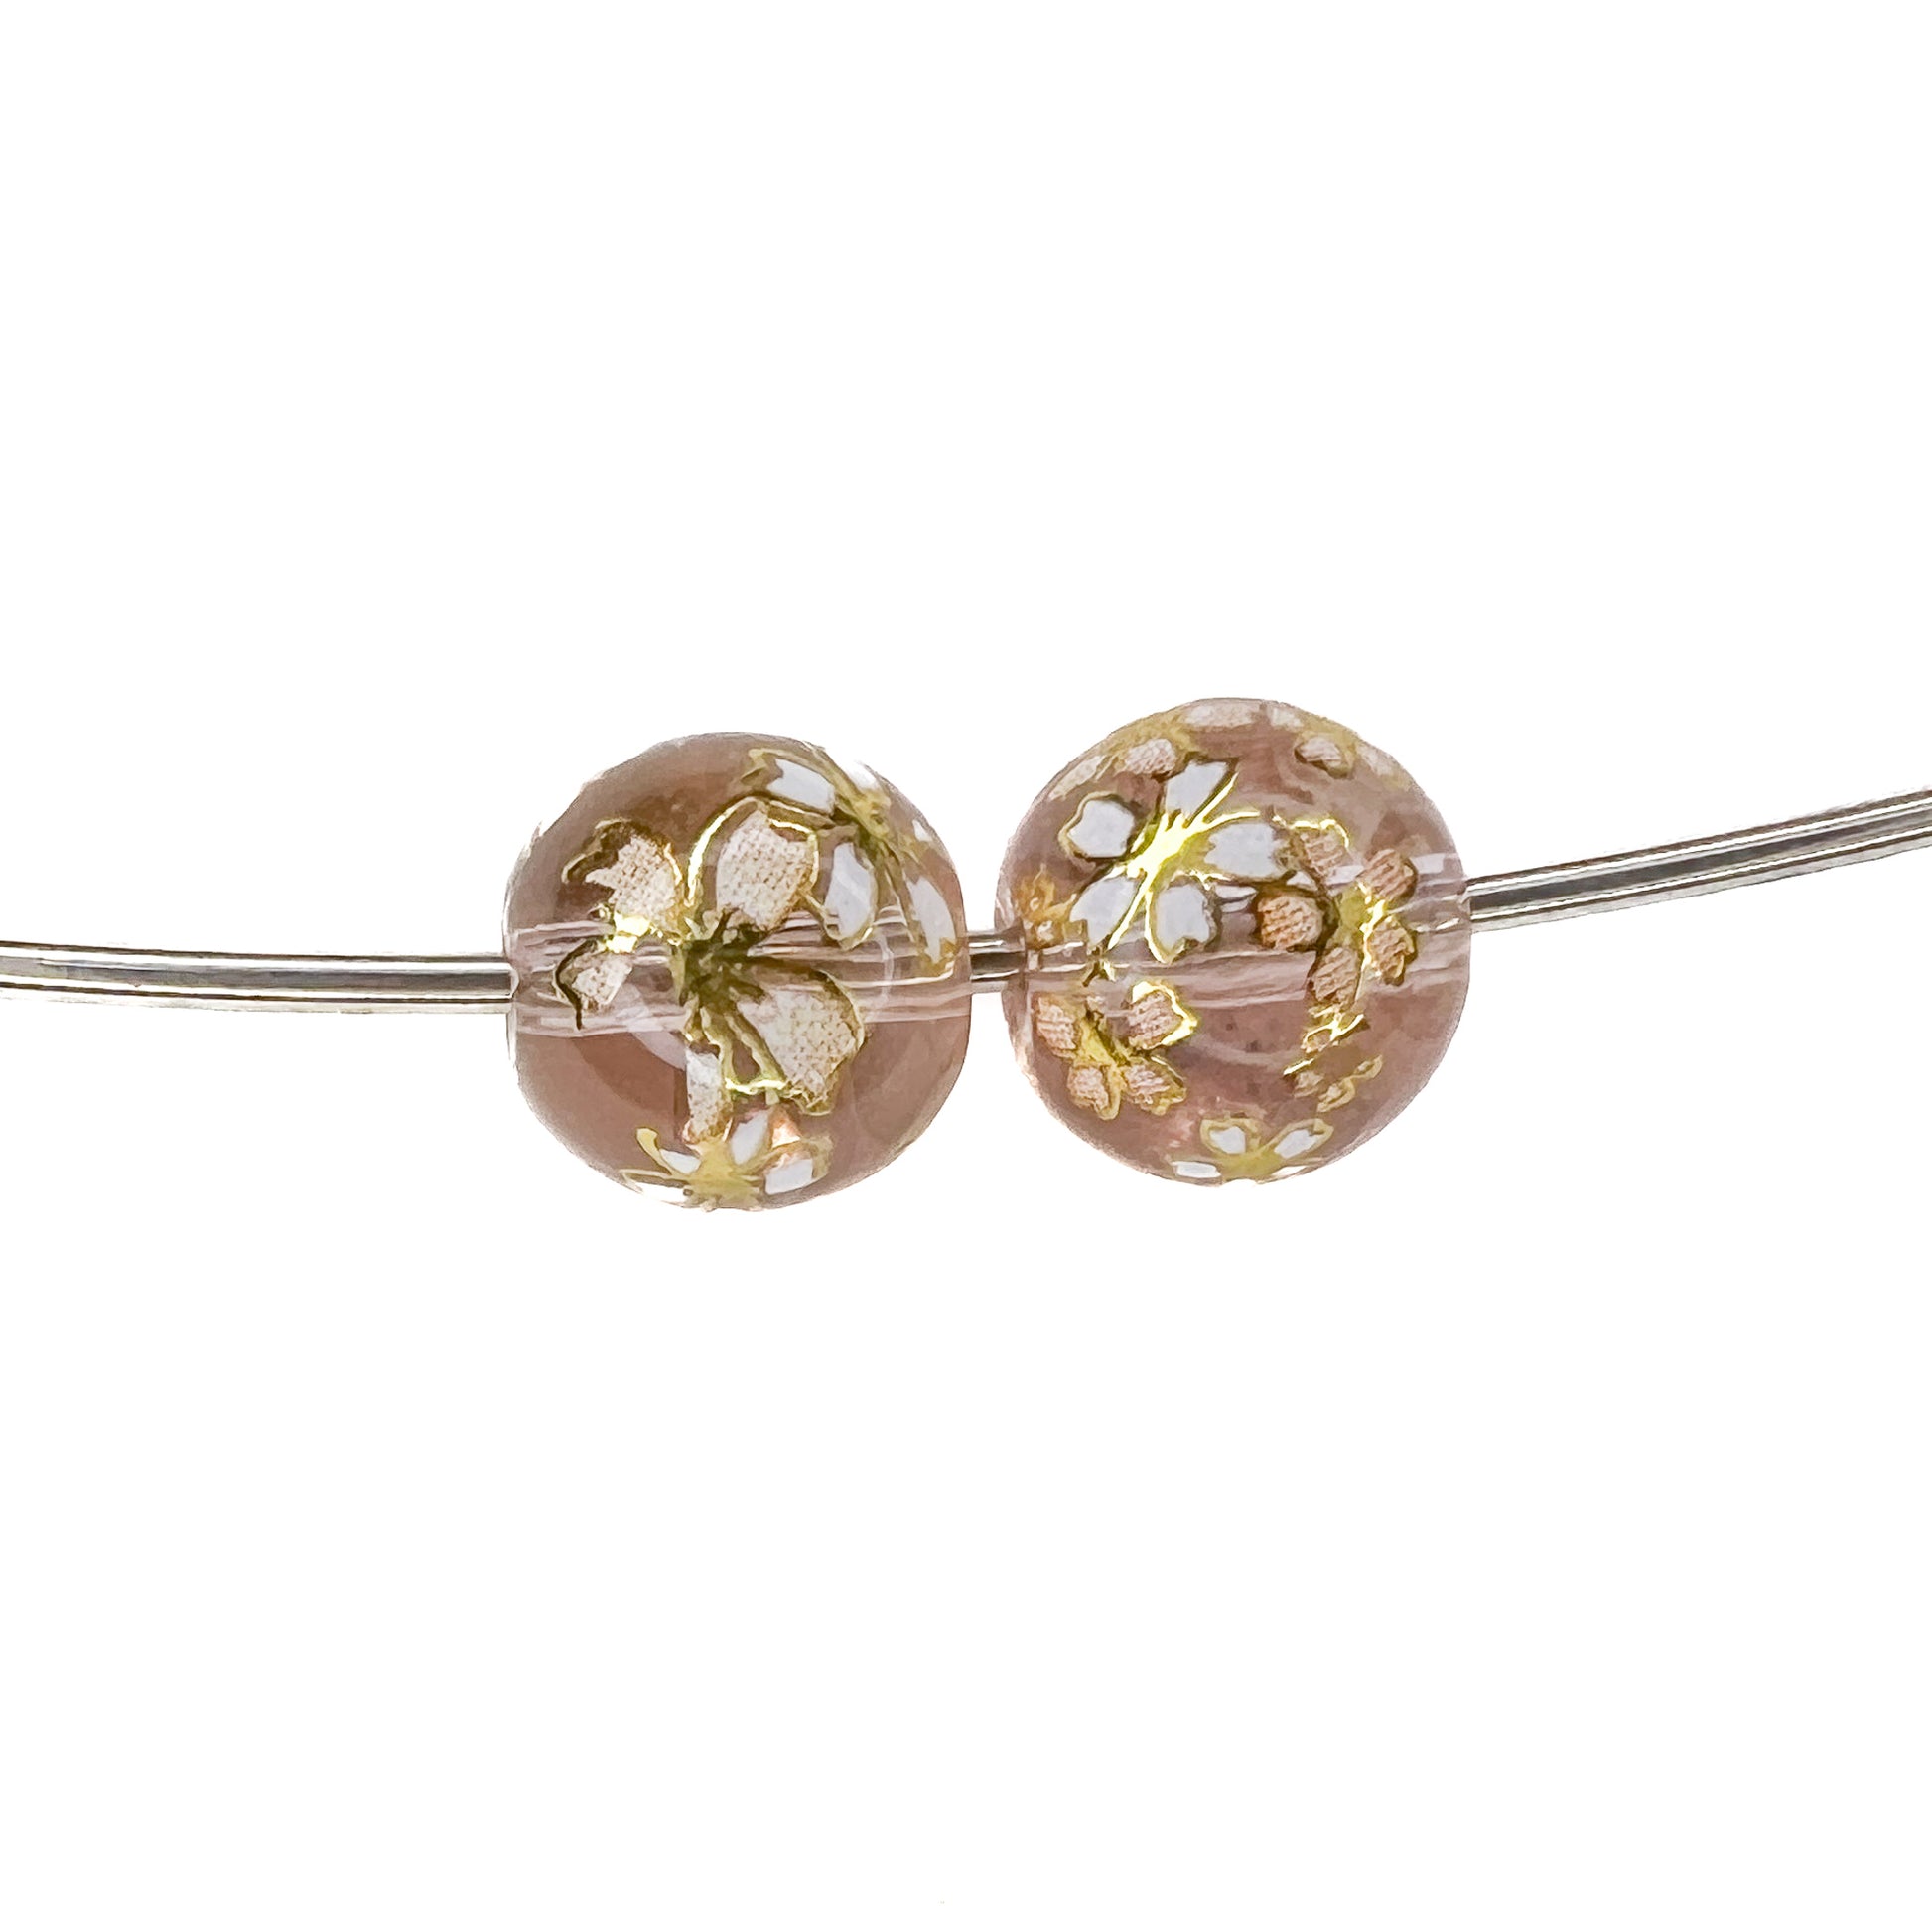 10mm Cherry Blossom Glass Etched Beads - 2 pc.